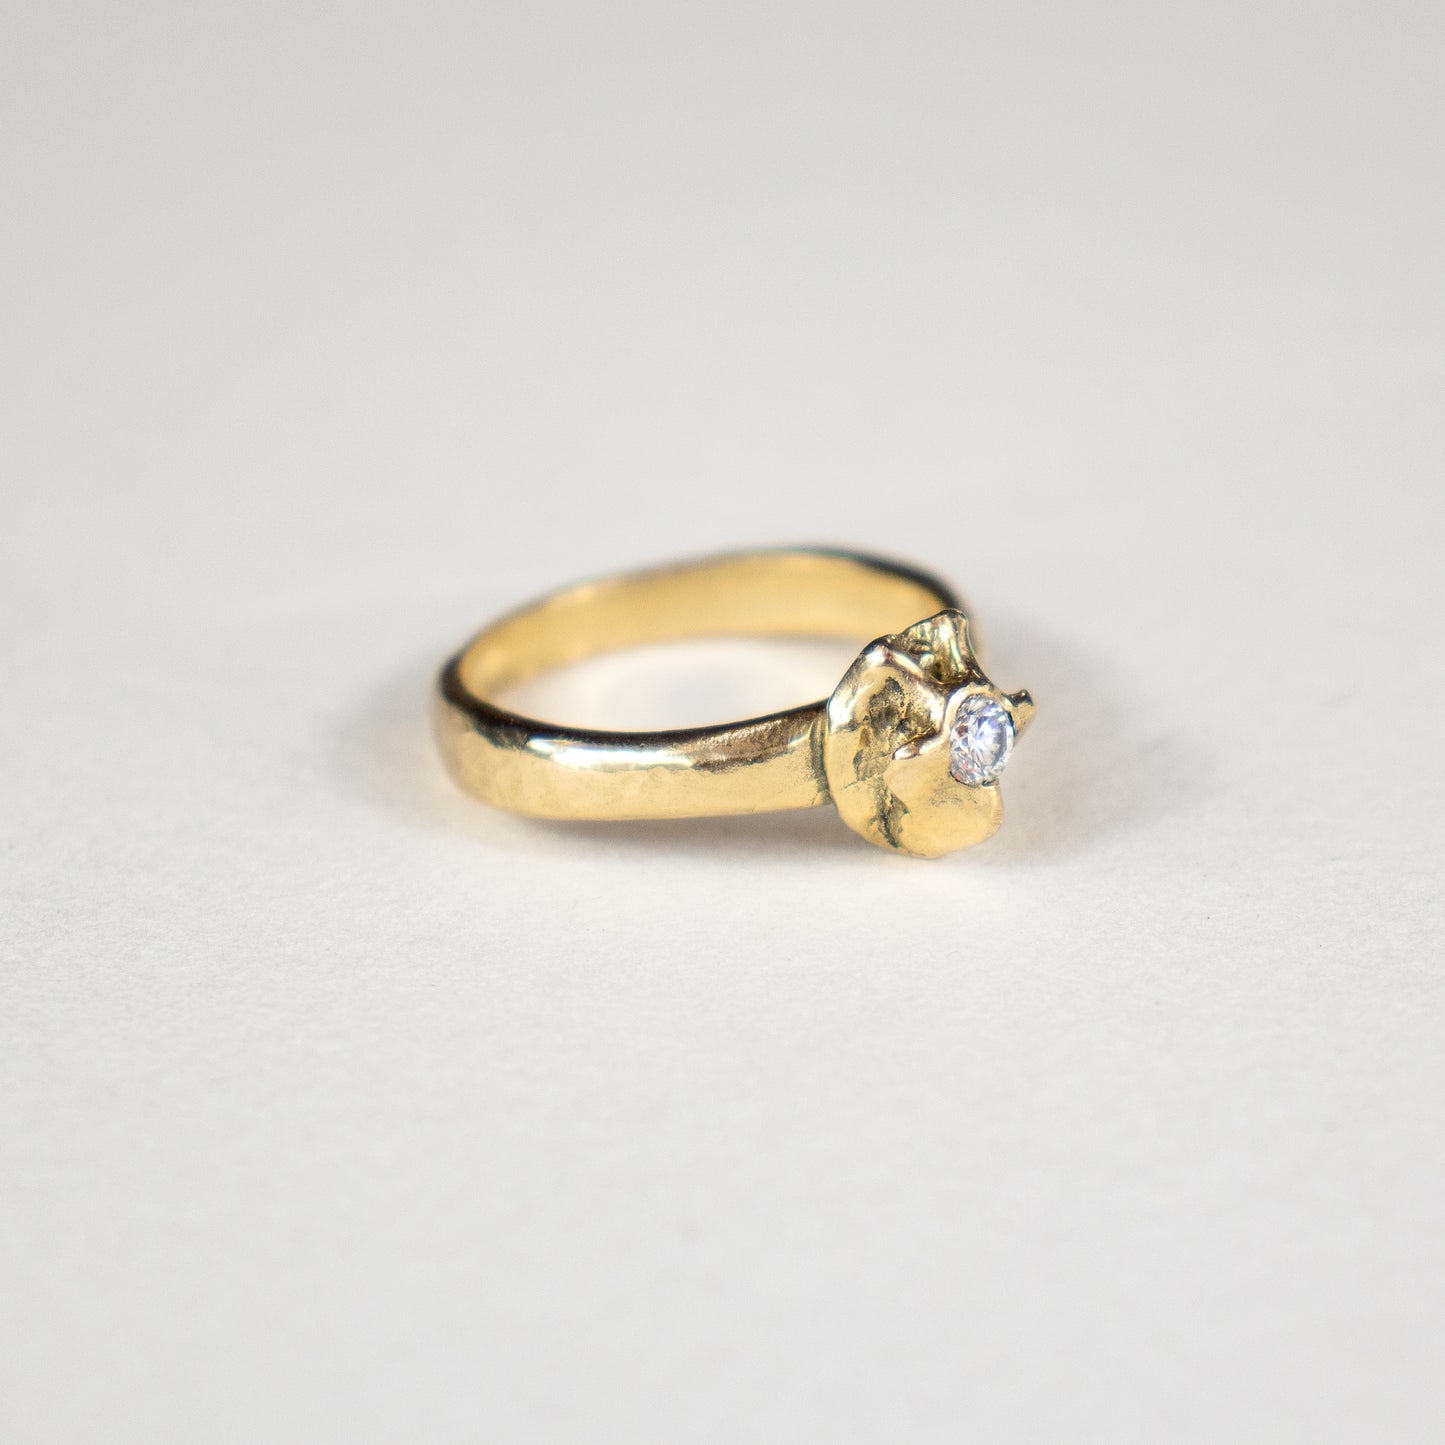 Solid reclaimed 14k gold vertebrae plague ring with 2.5 mm band-width set with a 3 mm diamond.